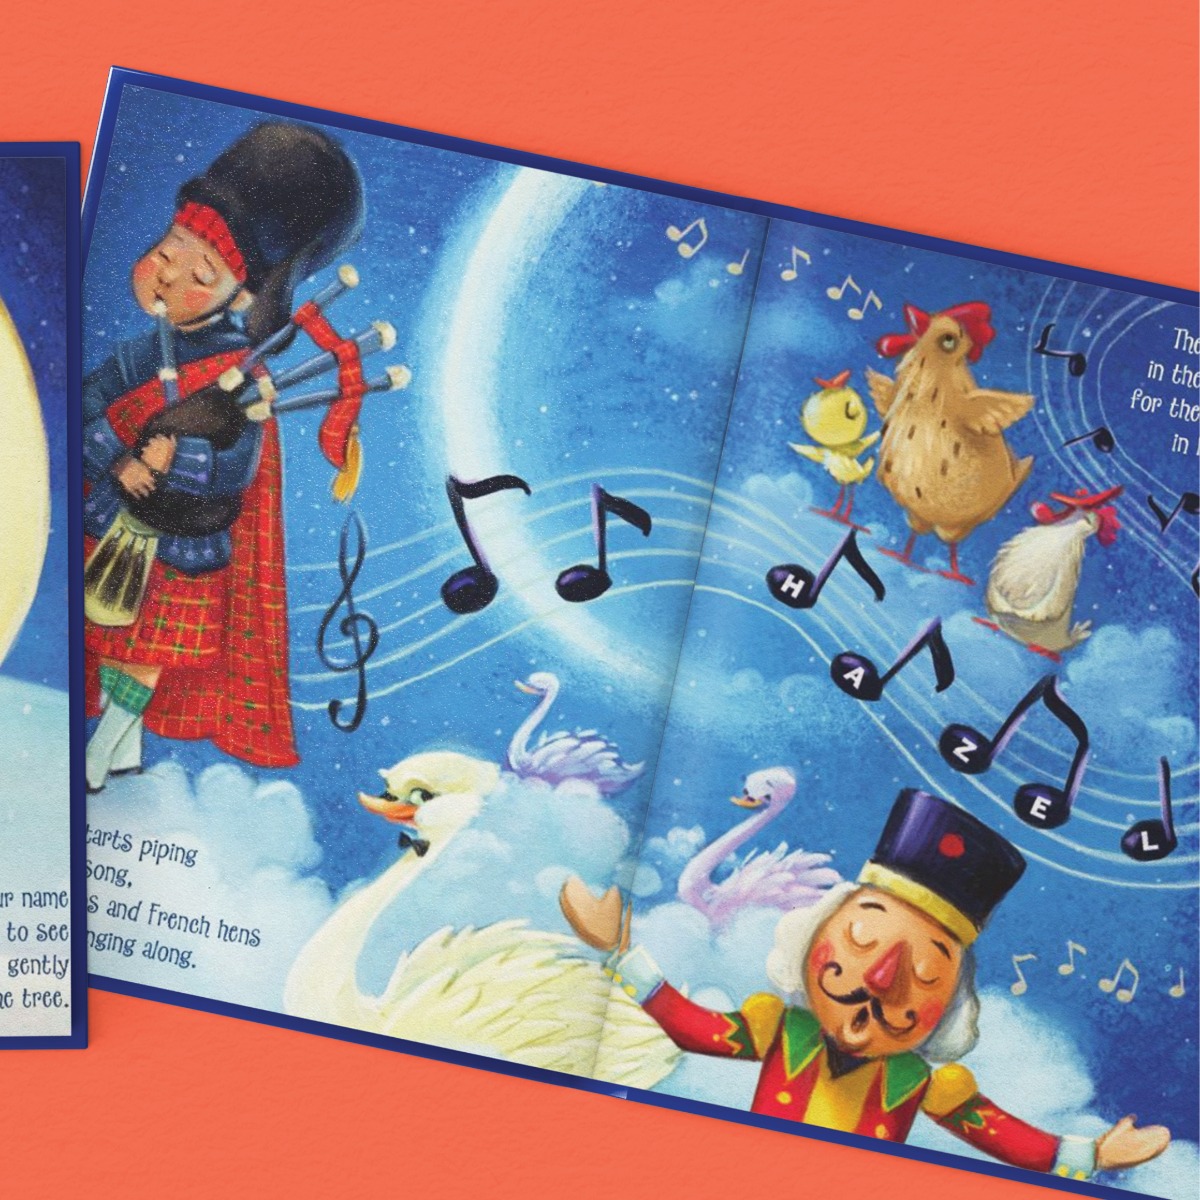 A Christmas Dream for Me Personalized Storybook and Polar Bear Gift Set 